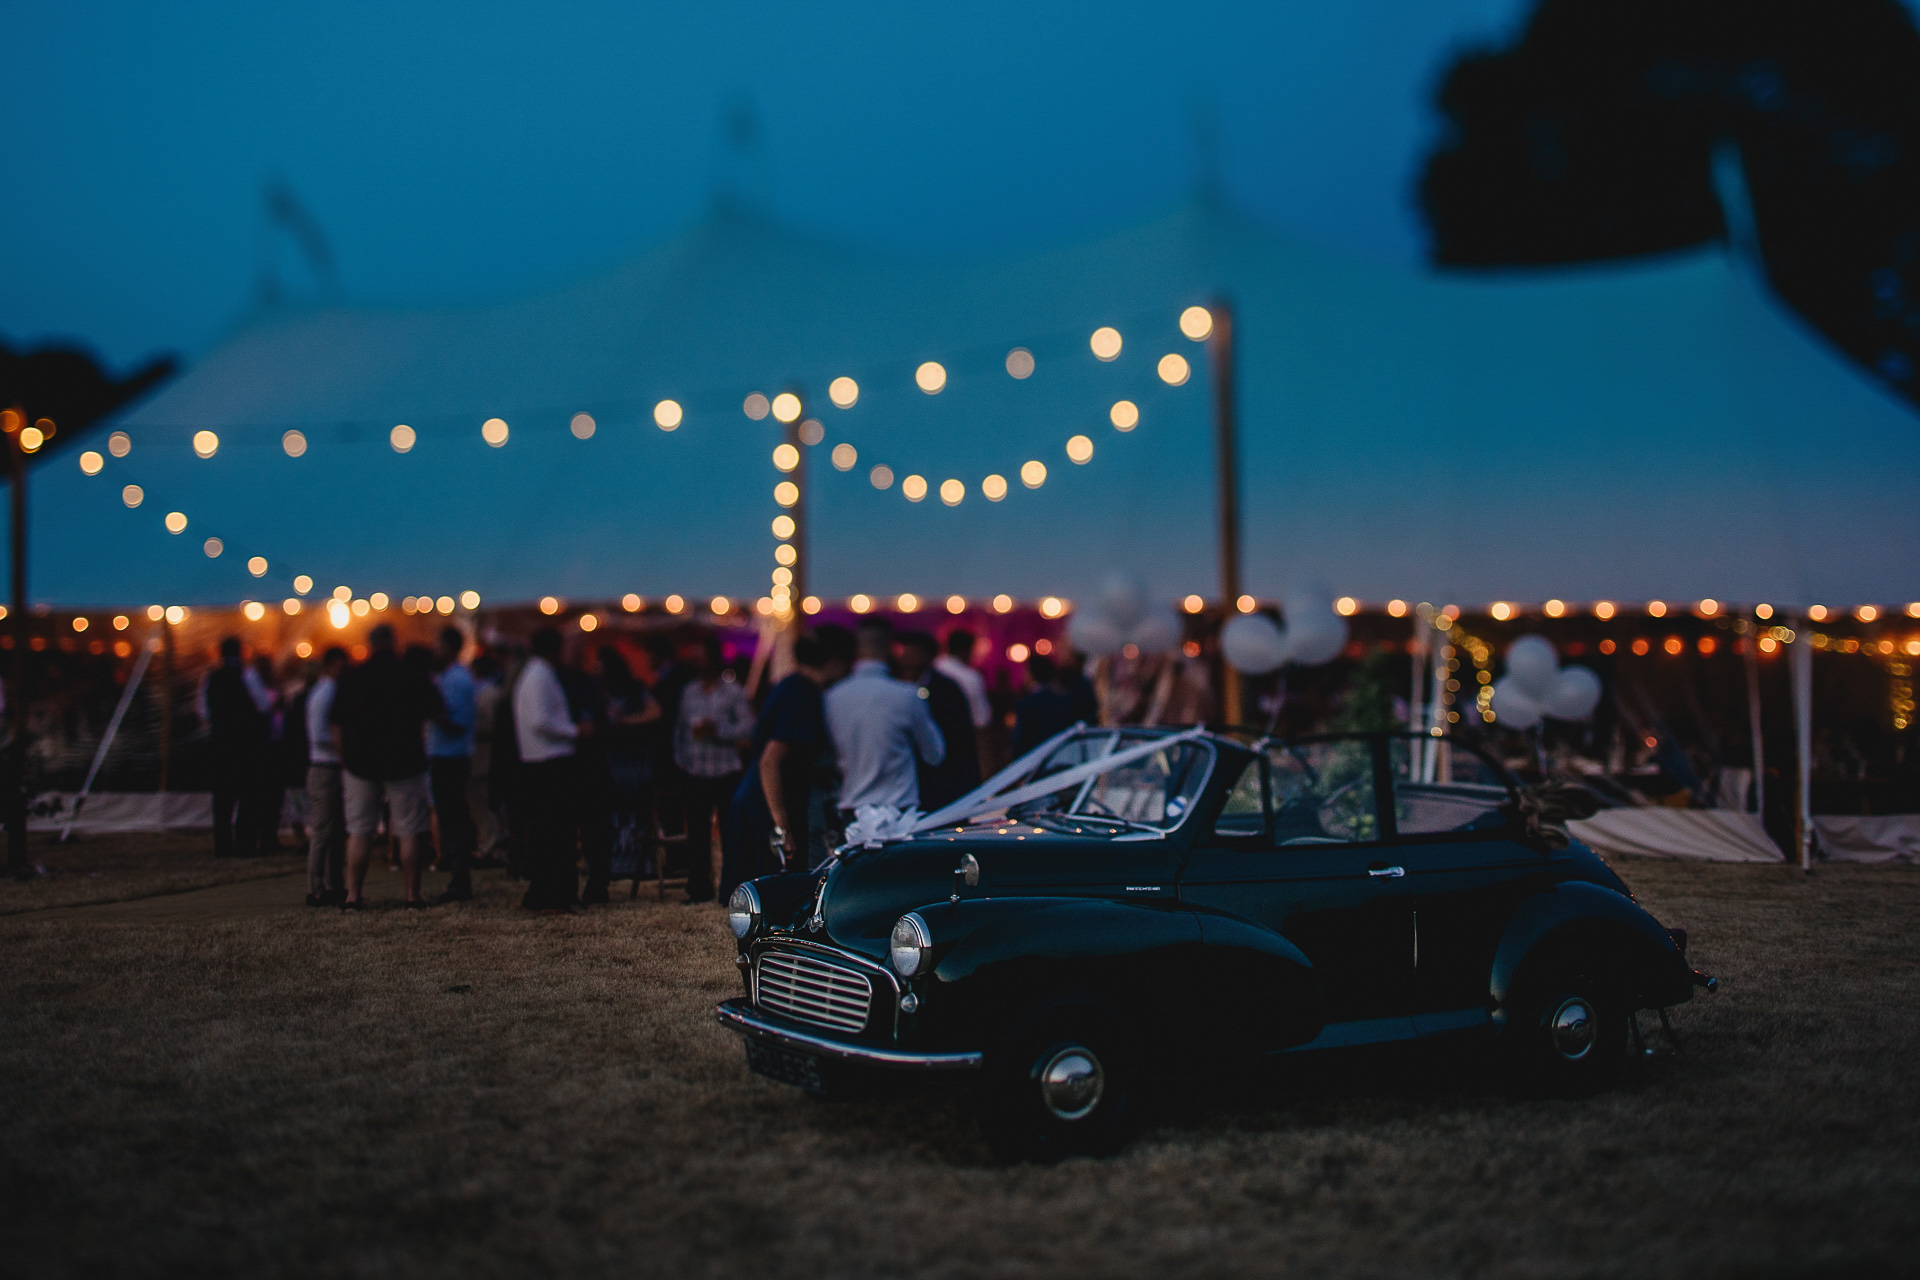 Morris Minor wedding car parked outside a marquee with festoon lighting